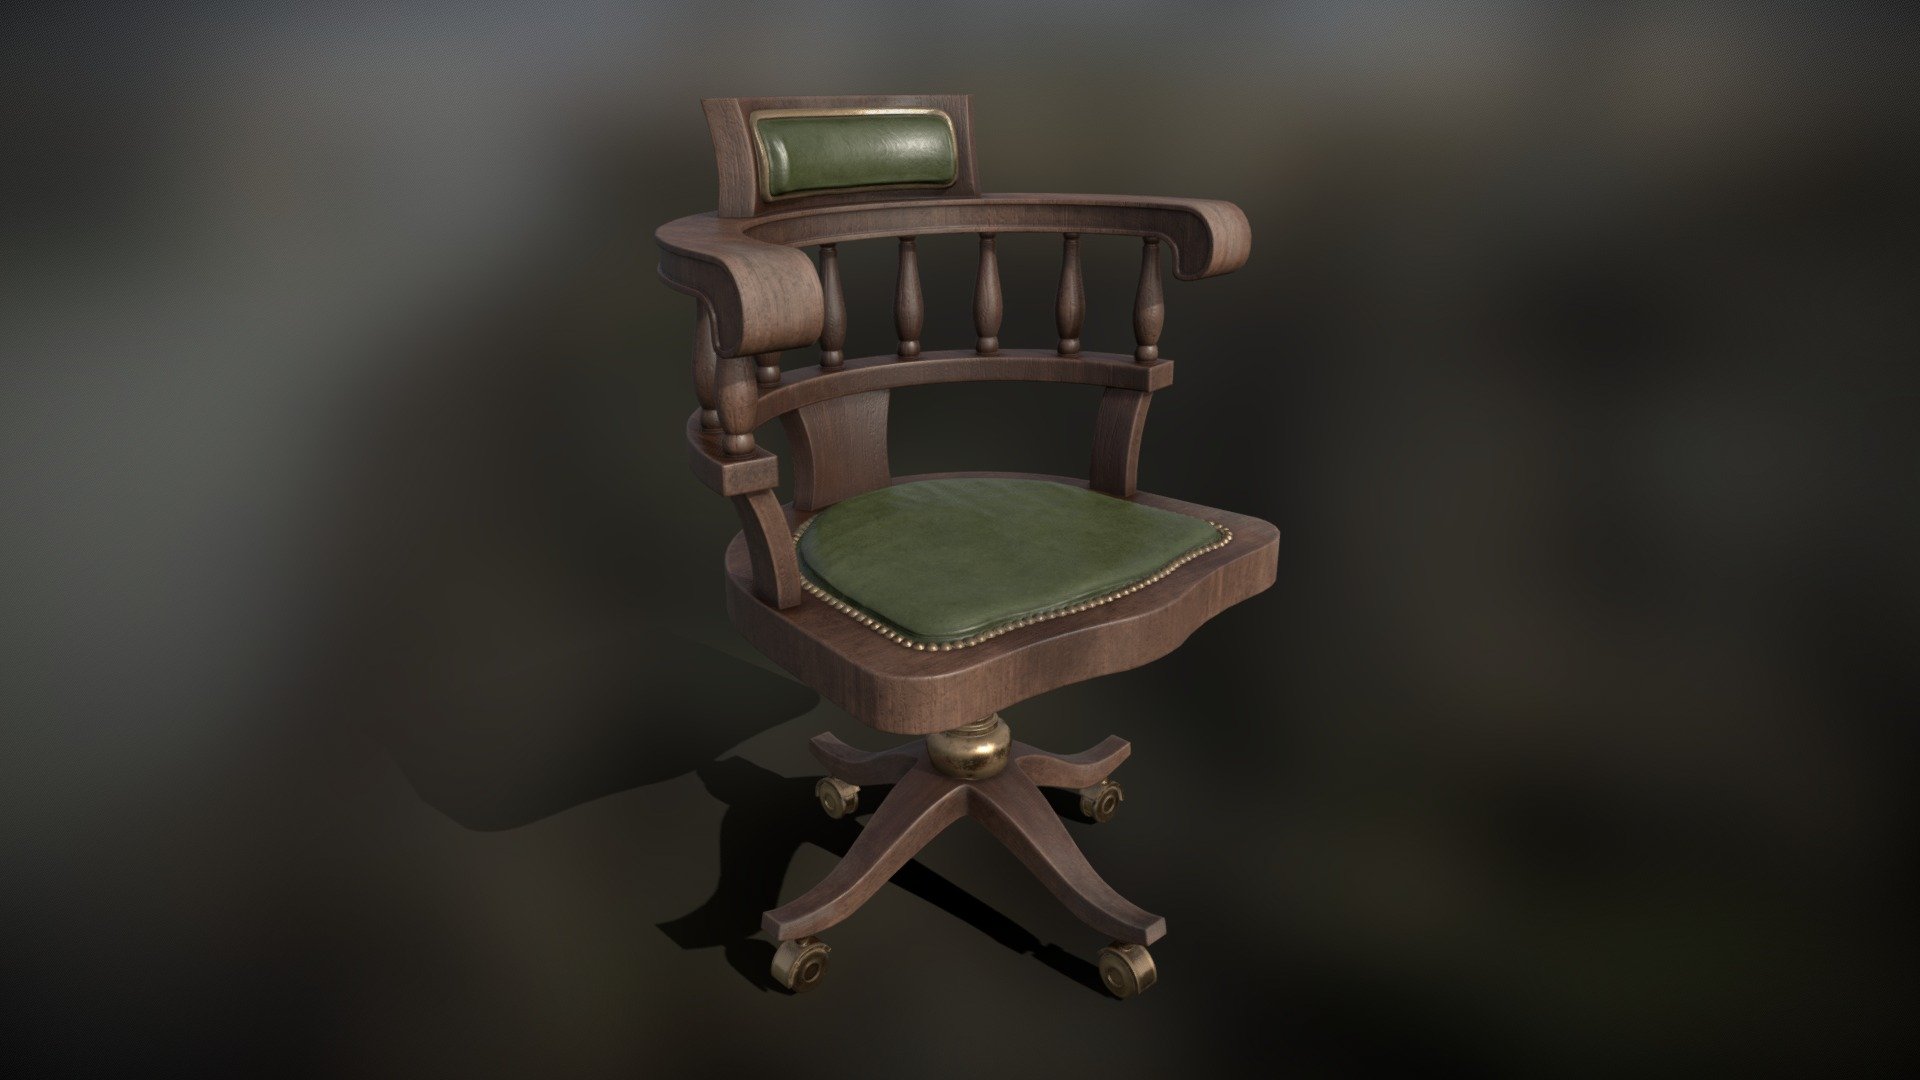 A Vintage Chair with 1K-4K Textures, baked. Ideal for use in Architectural Visualization and general Environment Art.

NOTES:

You'll get a Blender (2.90) File with all Materials applied, a Textures folder containing all baked Image Textures, as well as an &ldquo;.fbx